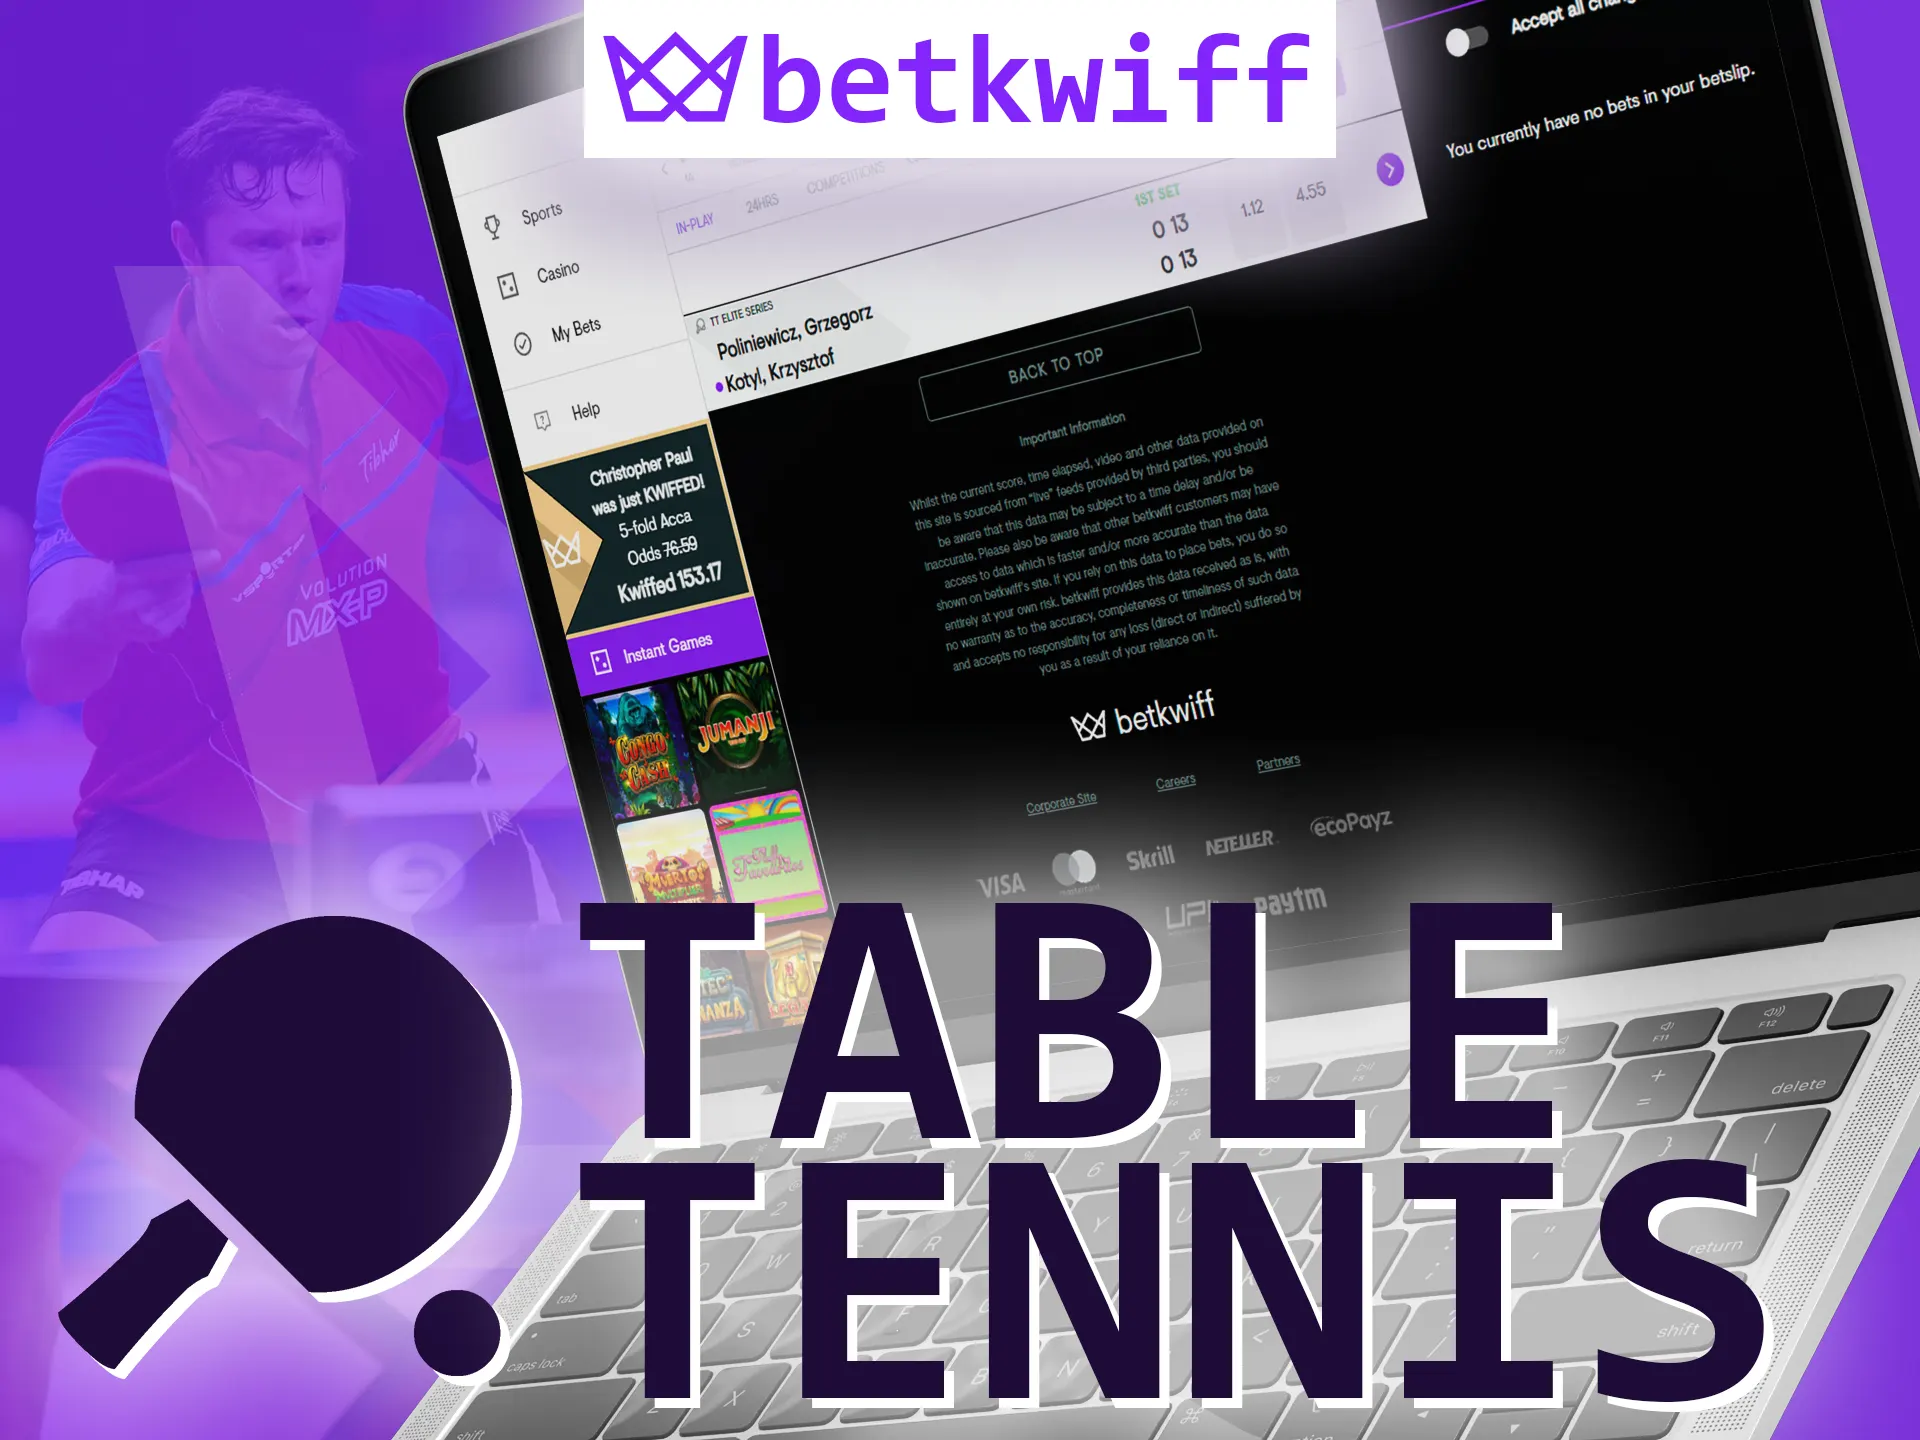 With Betkwiff, bet on table tennis.